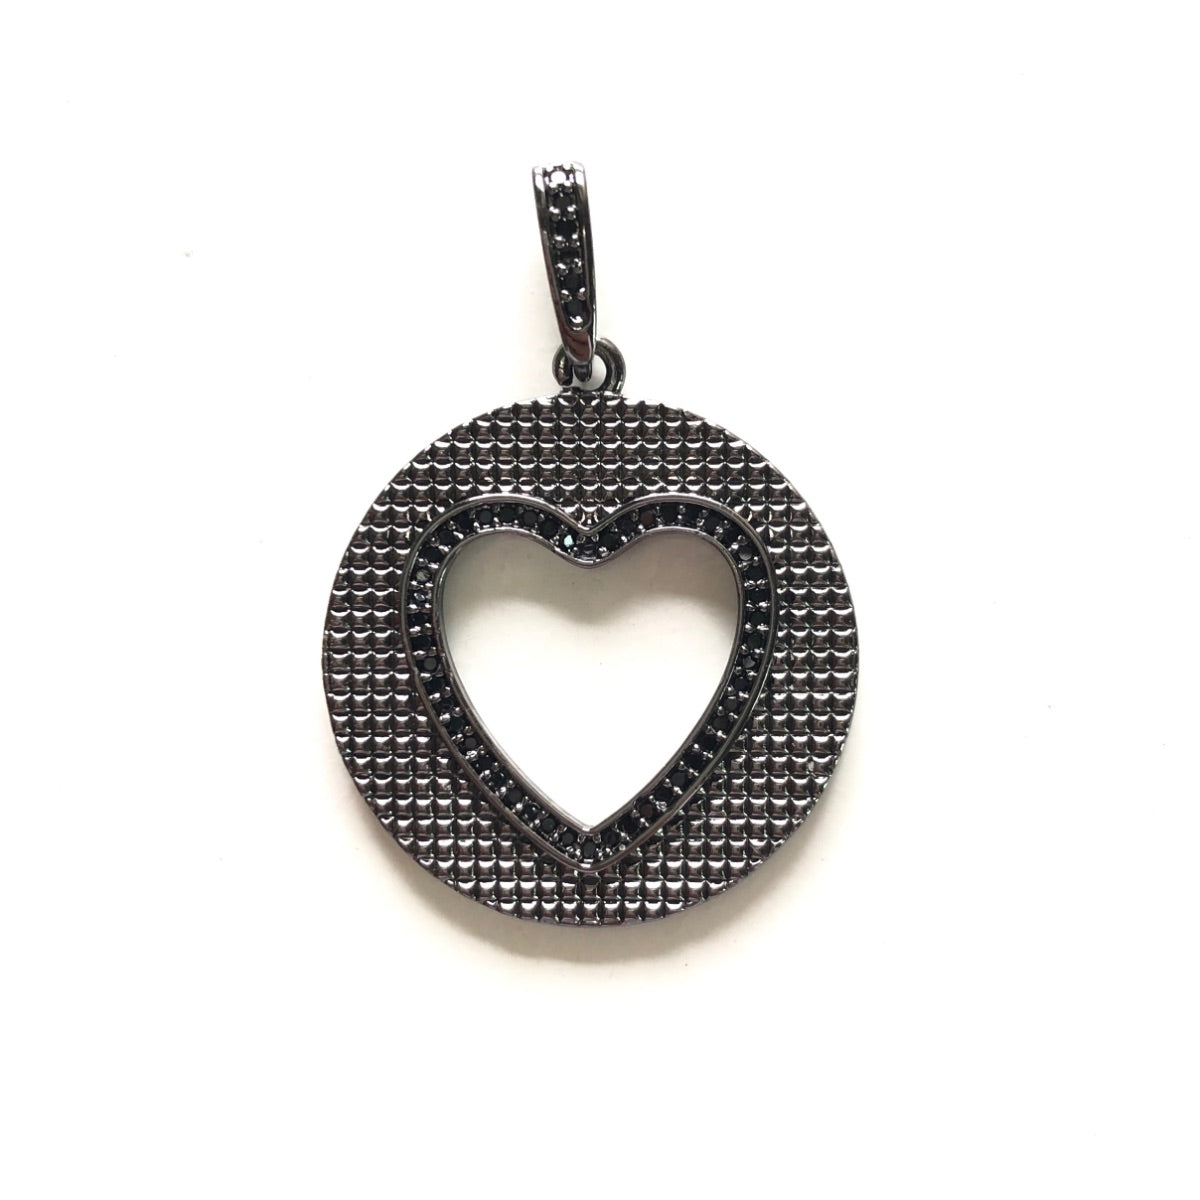 10pcs/lot 40*28.3mm CZ Pave Round Hollow Heart Charms Black on Black CZ Paved Charms Discs Hearts On Sale Charms Beads Beyond